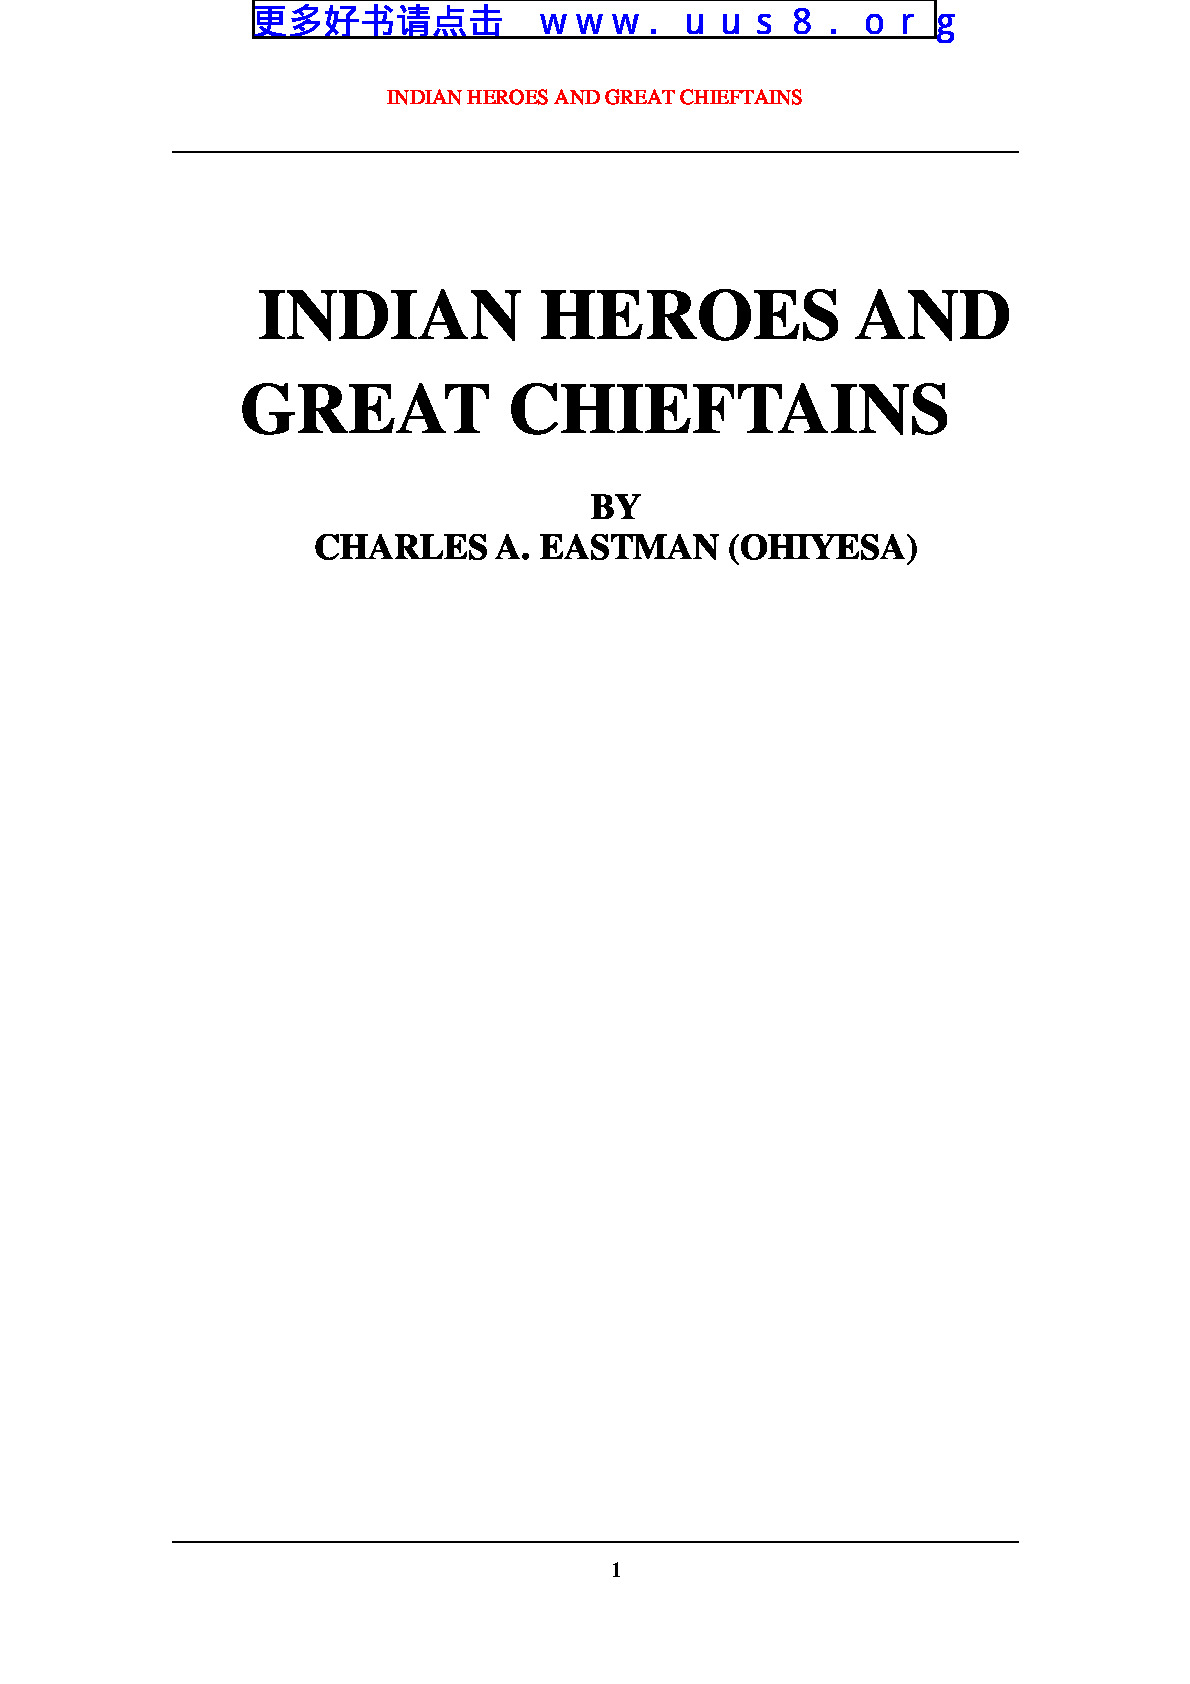 INDIAN_HEROES_AND_GREAT_CHIEFTAINS(印第安英雄)